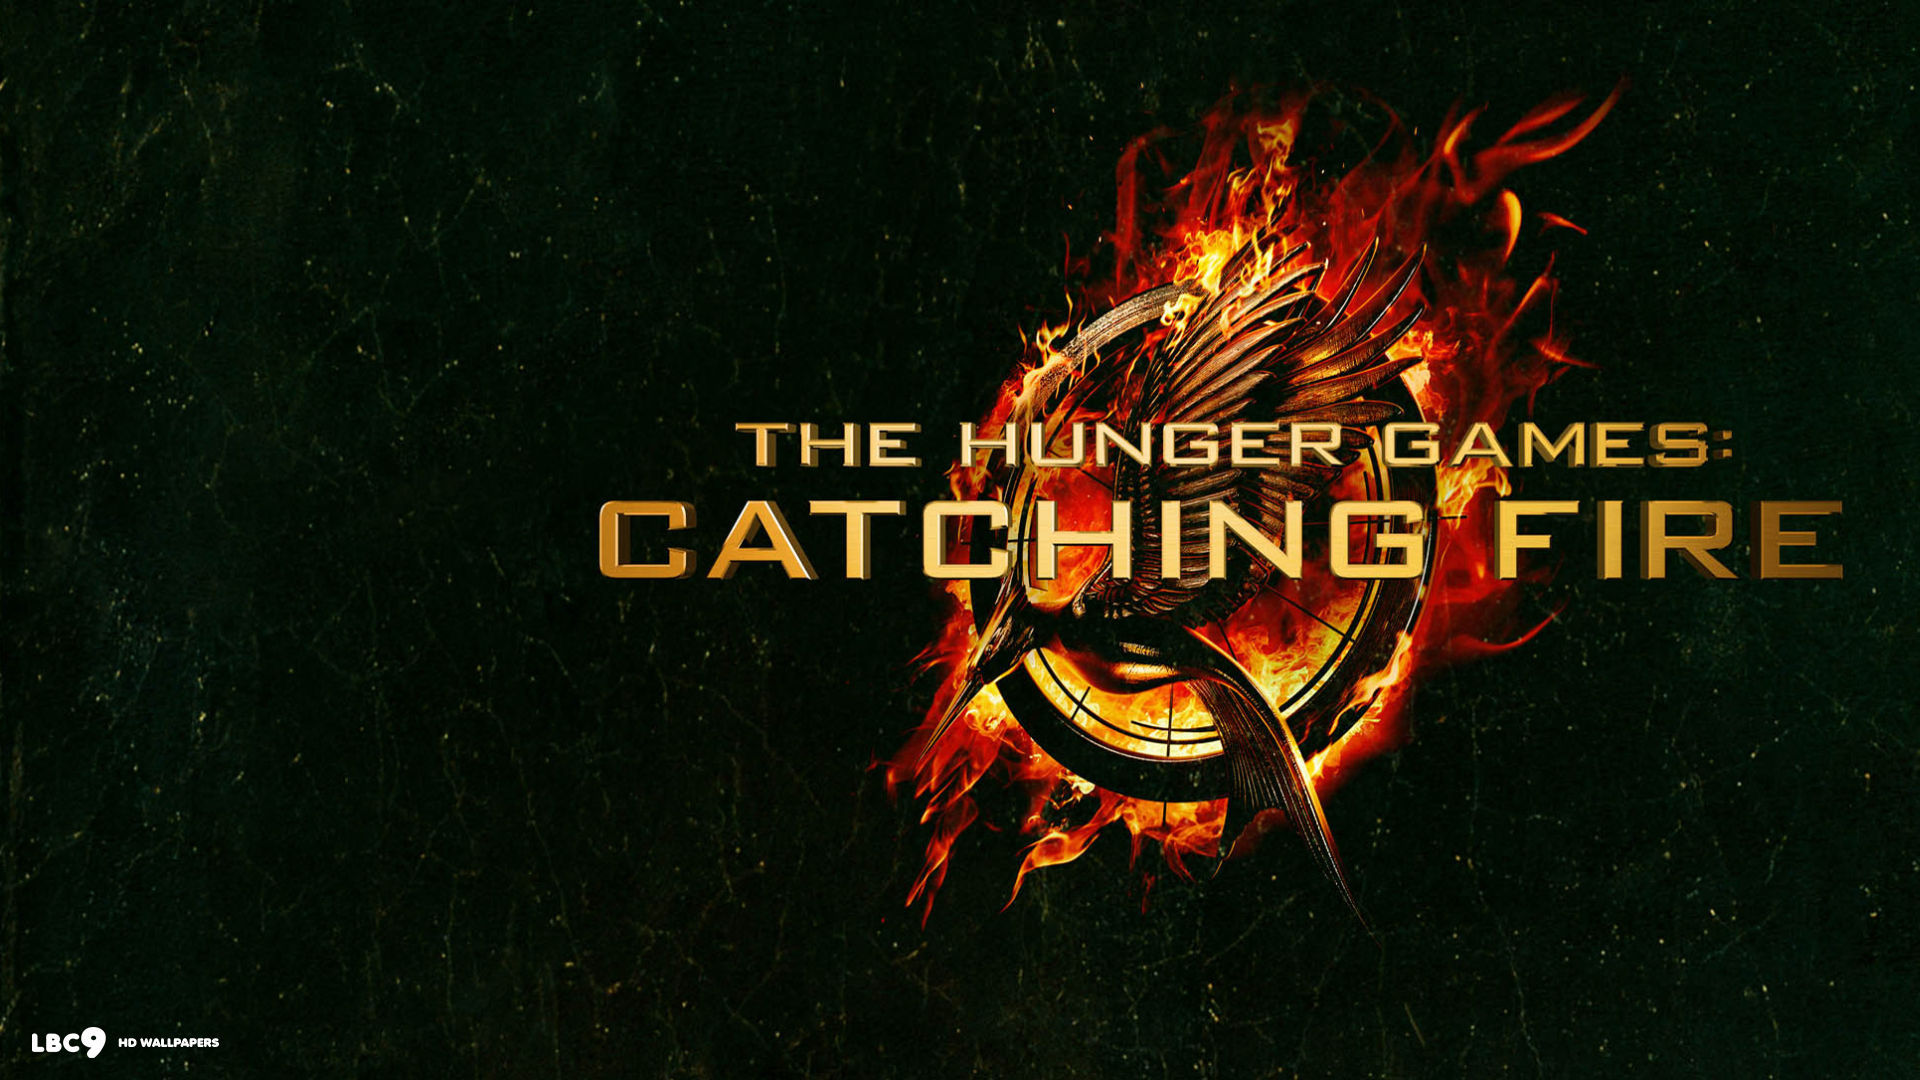 Hunger games catching firelogo in green background wallpapers and